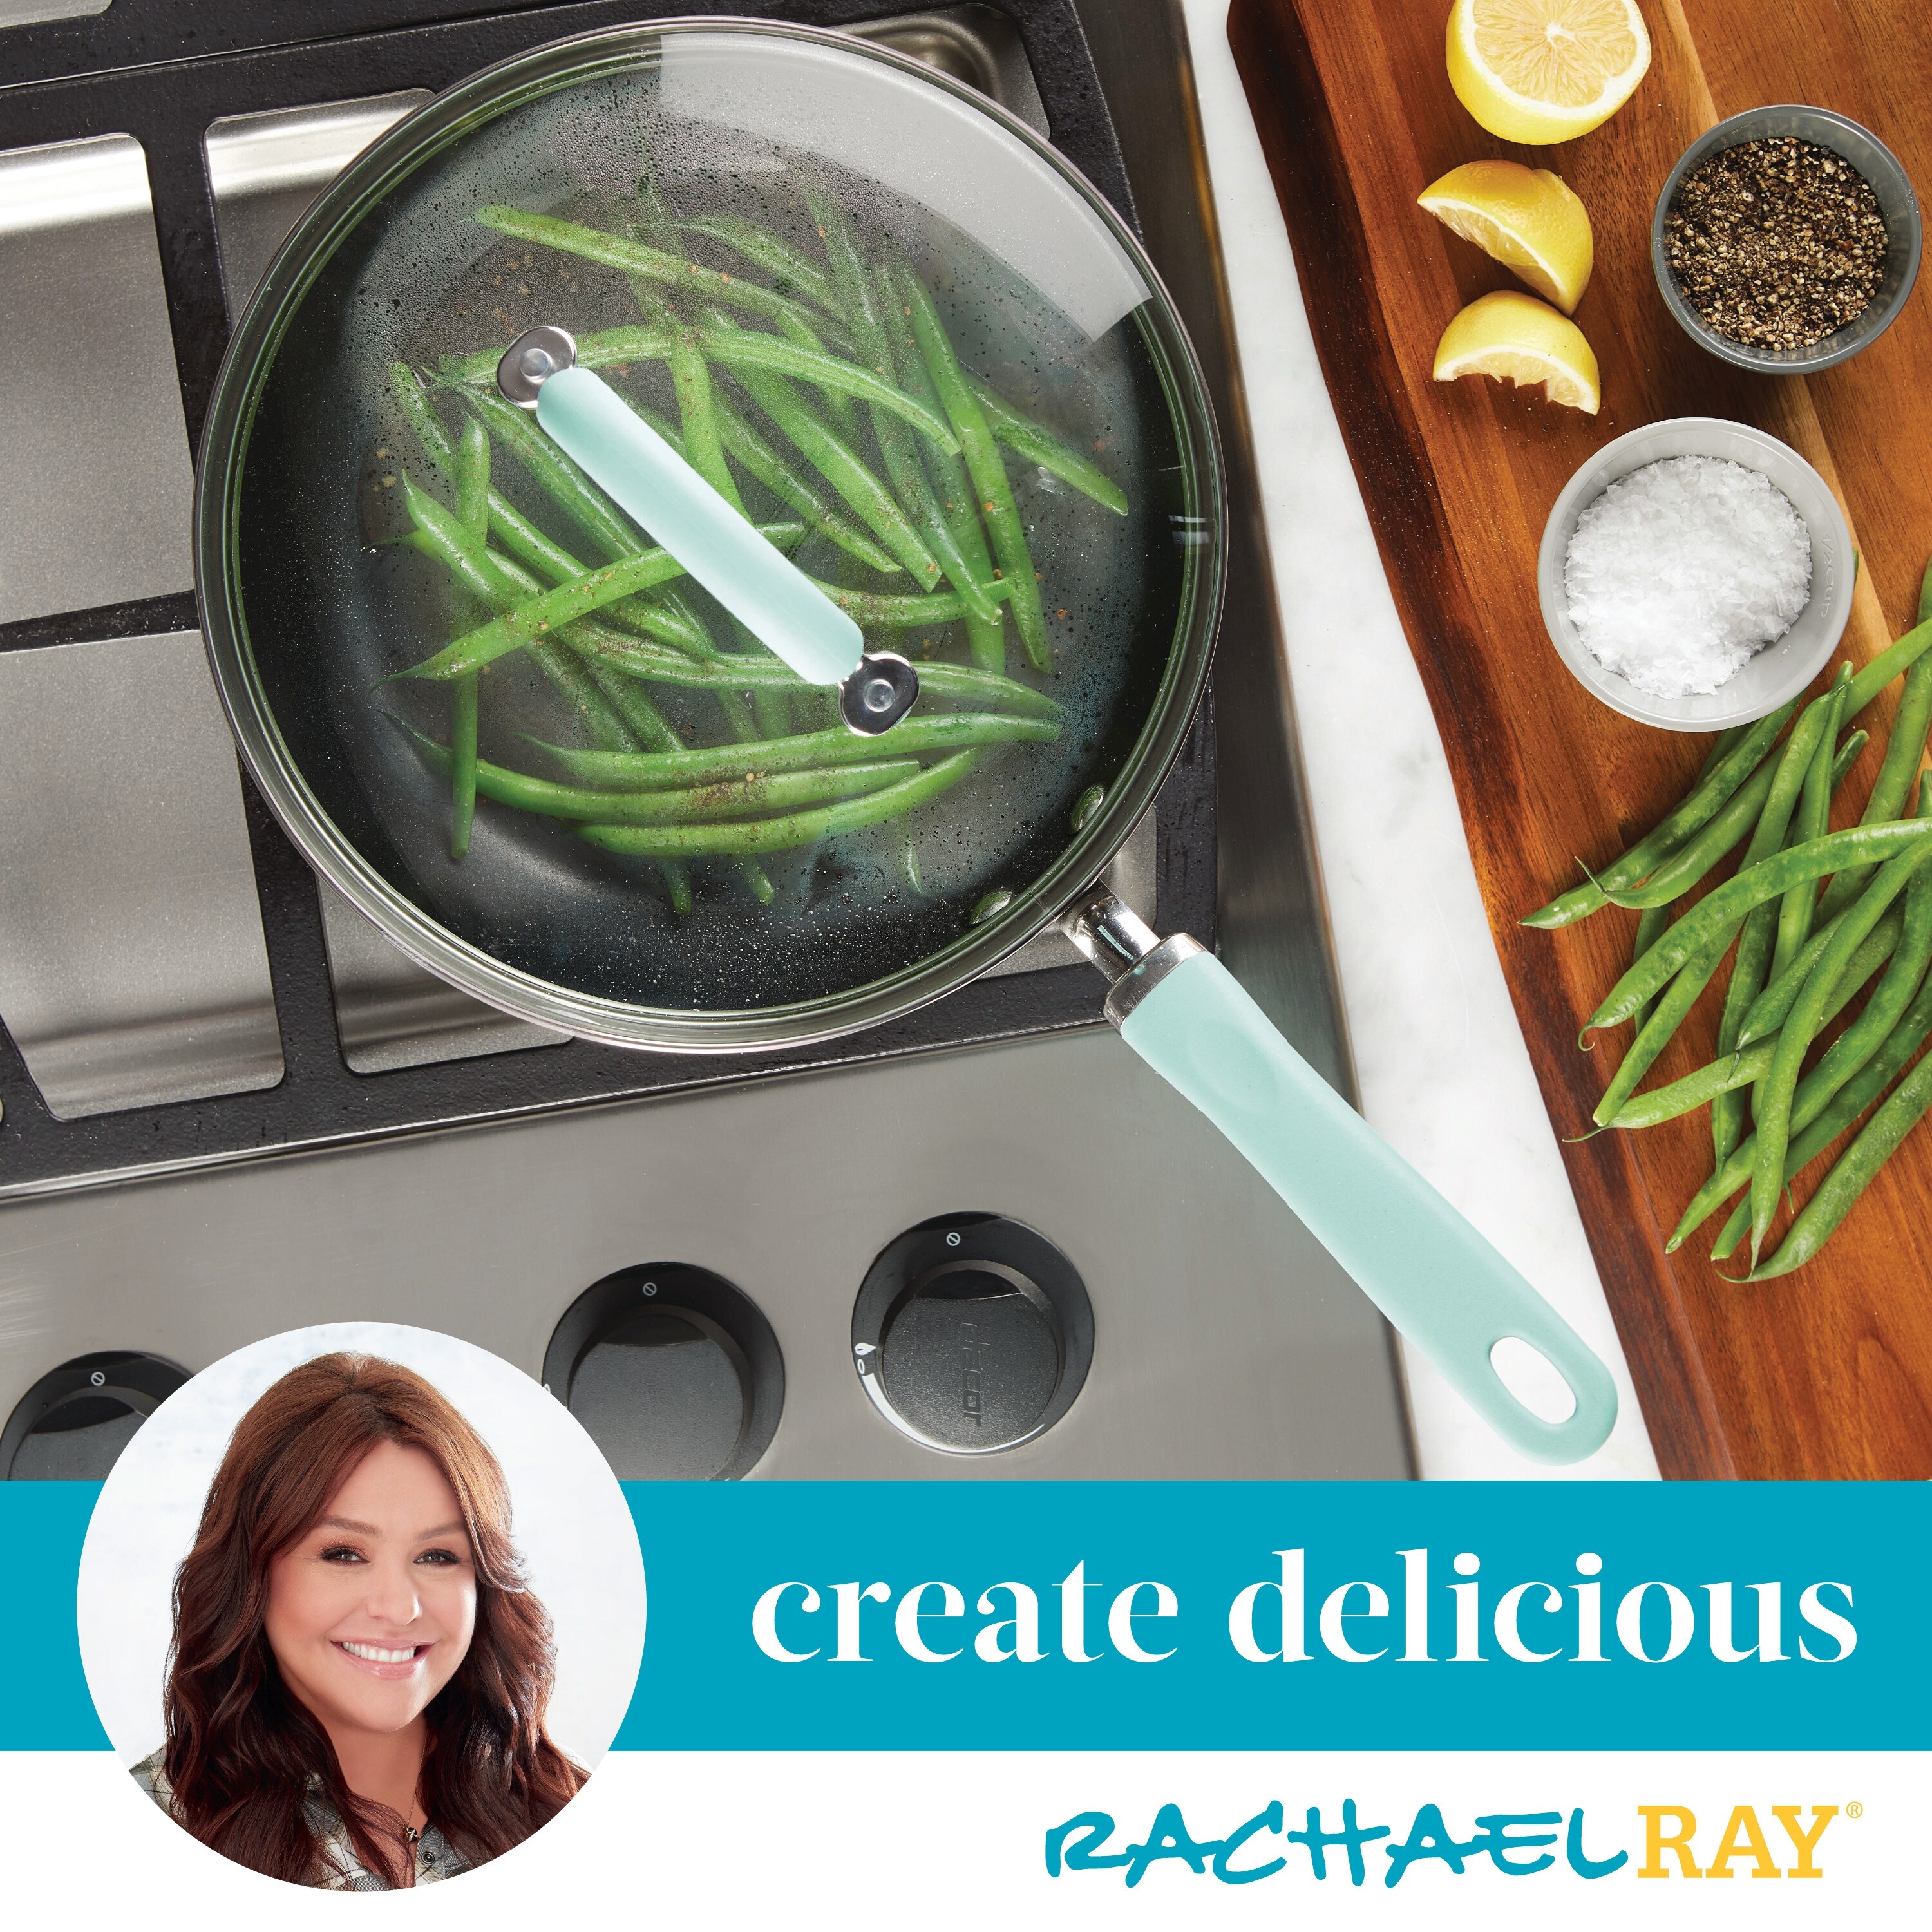 Rachael Ray Create Delicious Aluminum Nonstick Induction Deep Frying Pan  with Lid, 9.5-Inch - Bed Bath & Beyond - 26517520